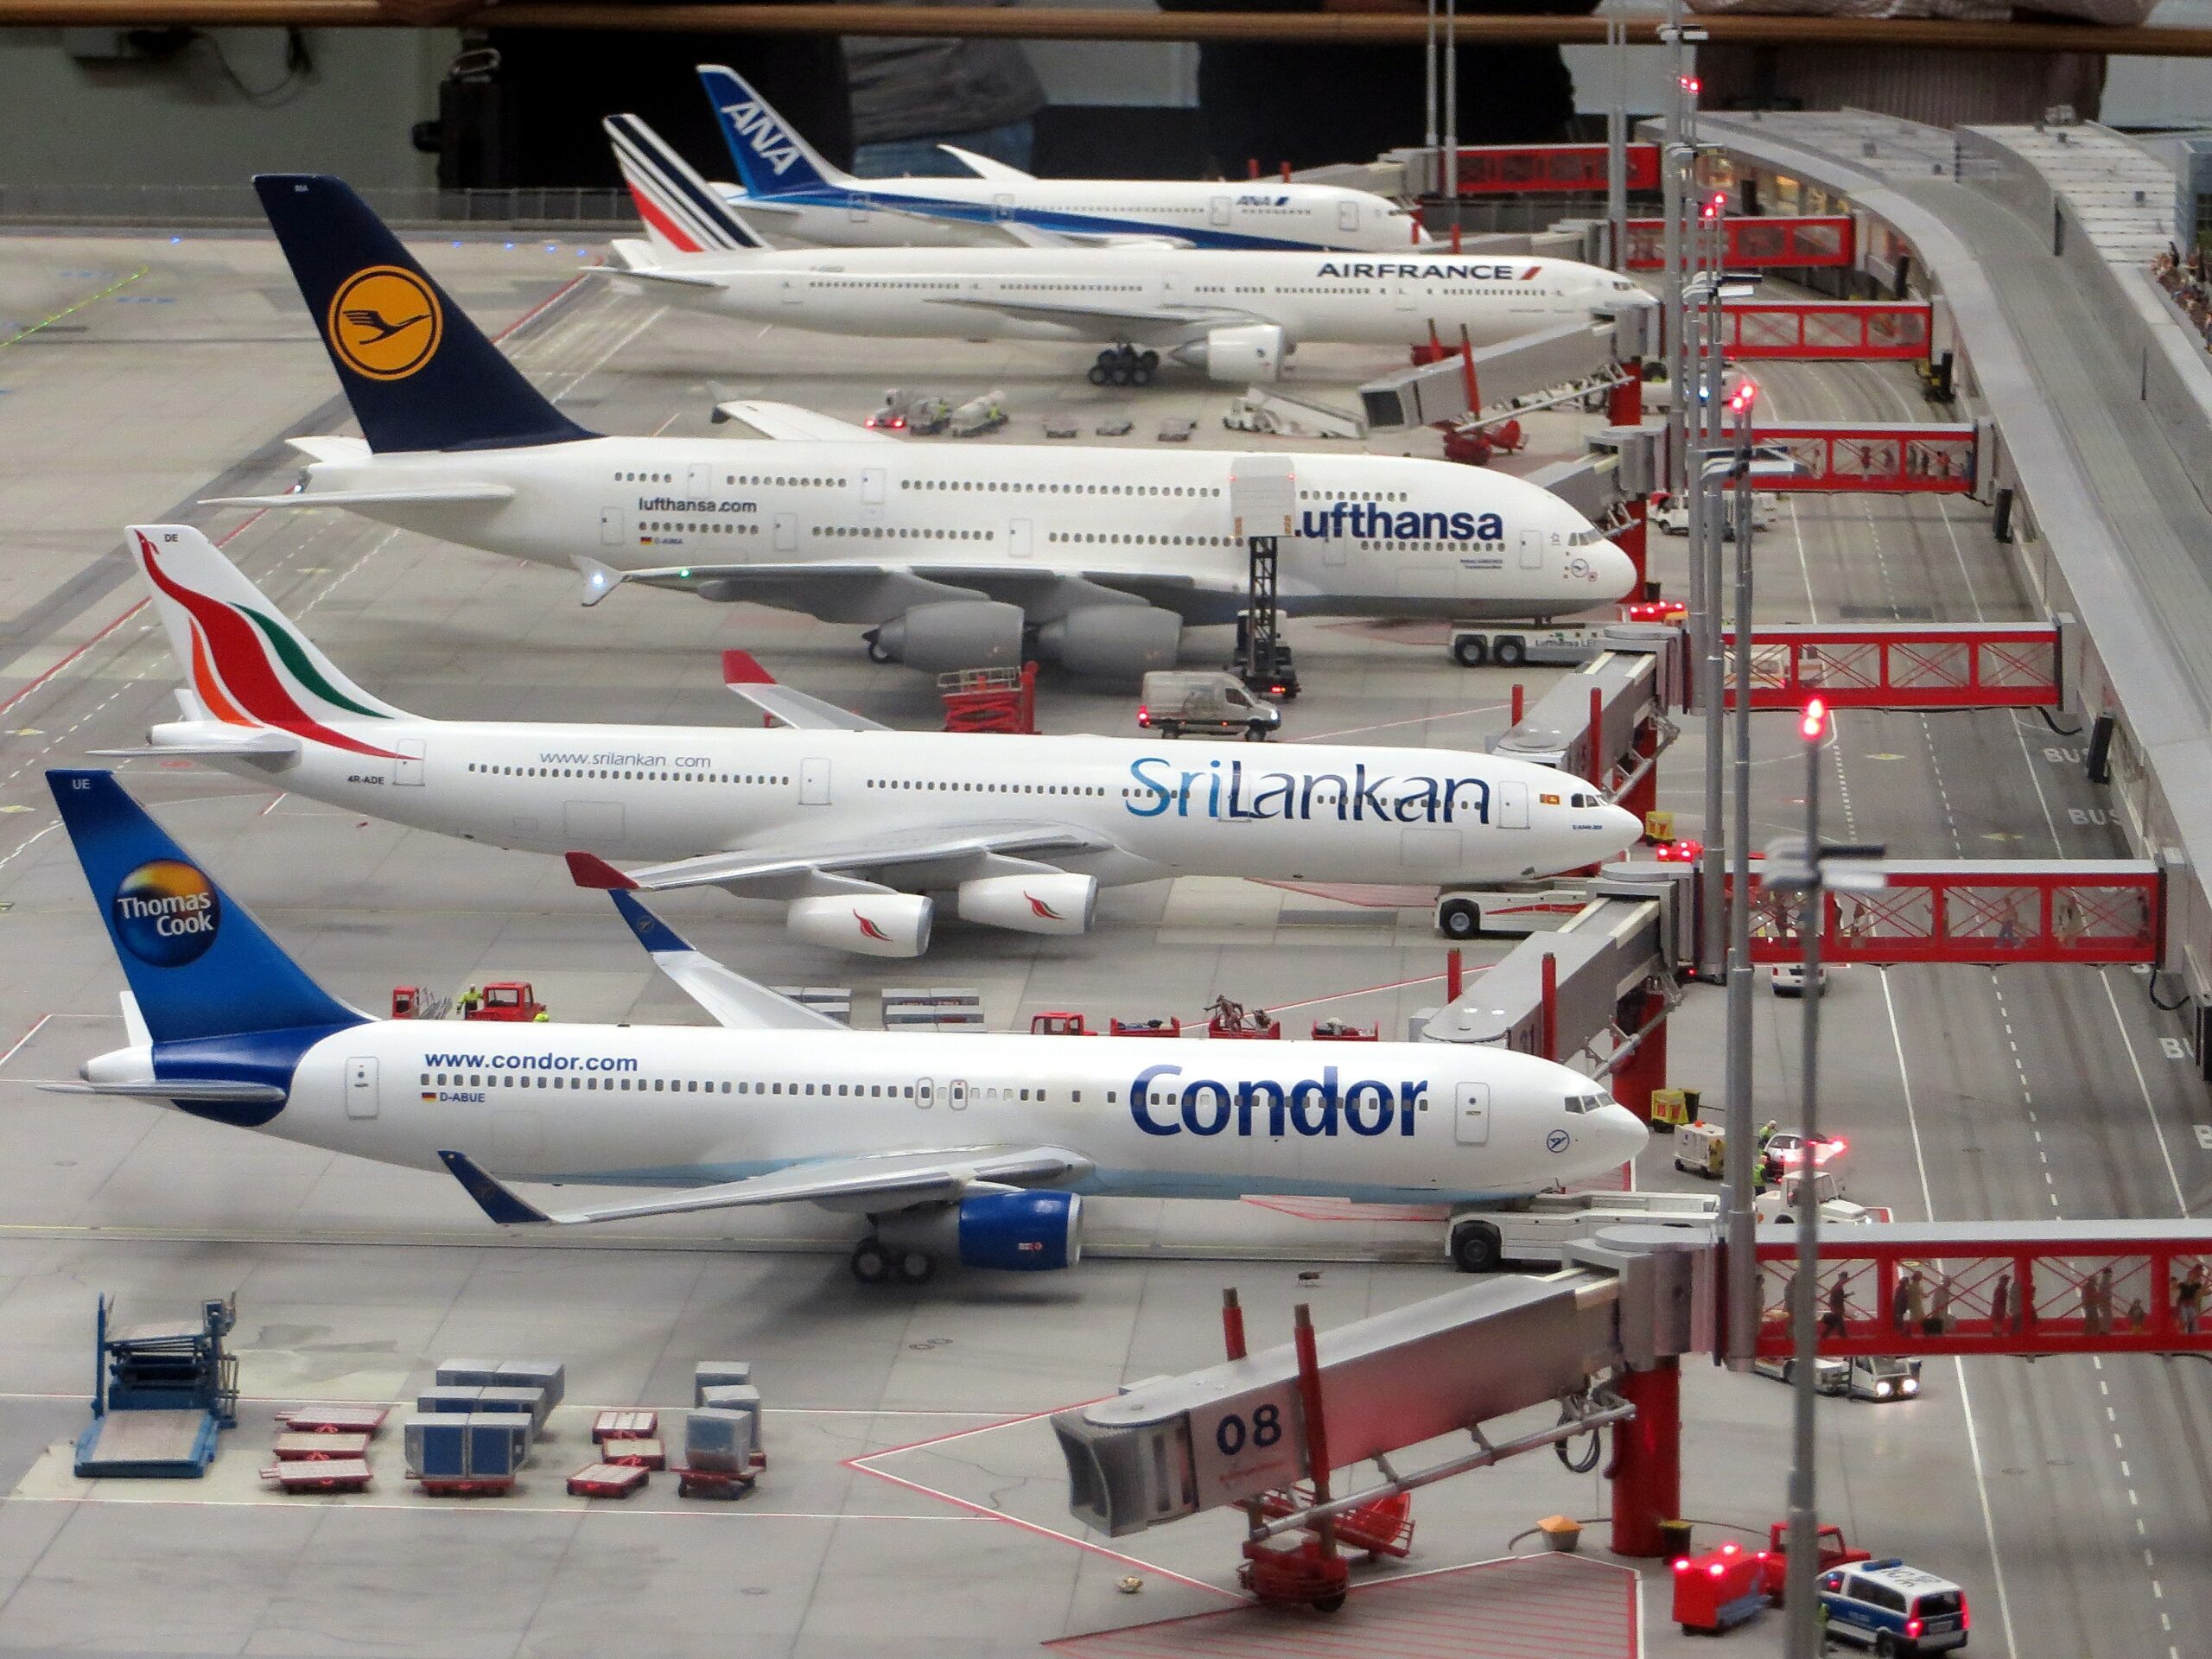 Different airline airplanes lined up in airport Photo by Pixabay: https://www.pexels.com/photo/condor-airplane-on-grey-concrete-airport-163792/